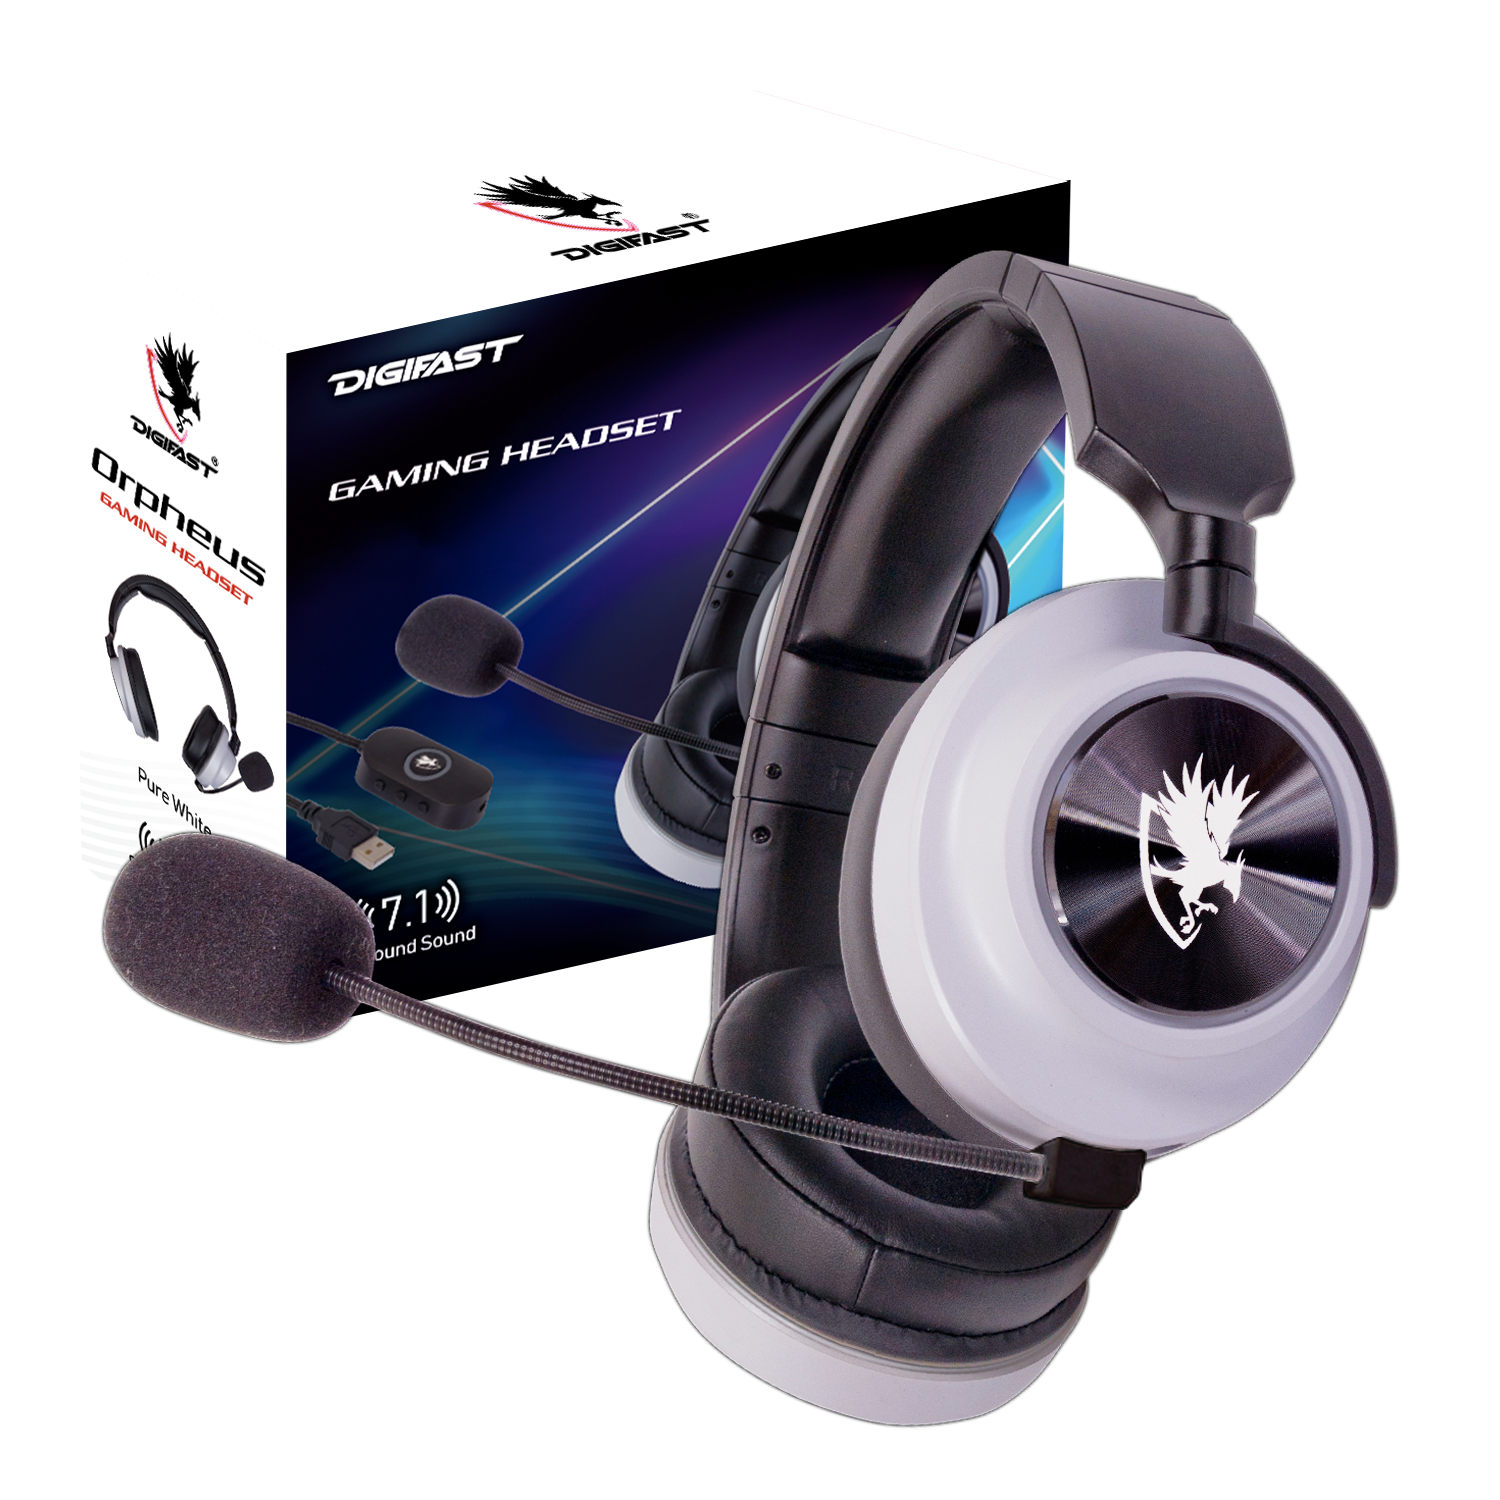 Digifast Orpheus Gaming Headset, Noise-Canceling Adjustable Microphone, Remote Vol/Mic Control, Plug & Play, 50 mm driver